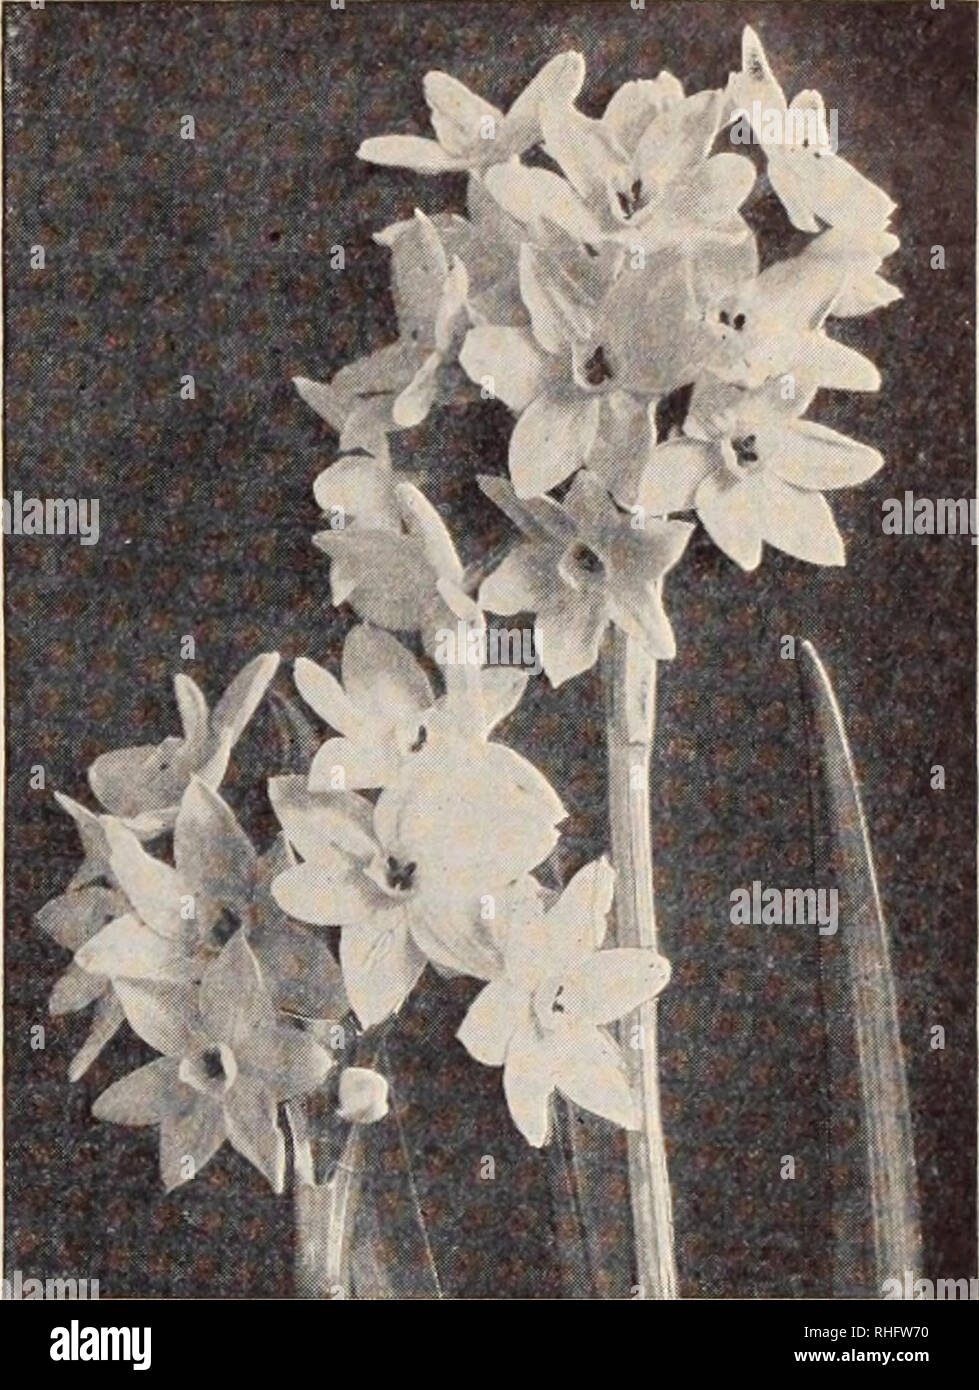 . Boddington's quality bulbs, seeds and plants / Arthur T. Boddington.. Nursery Catalogue. BODDINGTON S '^A^CLtitV BULBS 5 Narcissi and DafYodils Paper White Narcissi J, B.—Paper White Narcissi can be flowered for Christmas if planted during August in pots or shallow boxes; can also be grown in water the same as Sacred Chinese Narcissi ' Doz. 100 1,000 jrrandiflora. The well-known varietj'; large-sized bulbs $040 $200 $1500 jirandiflora Multiflora. This variety is a great improvement over the Grandiflora; a vigorous grower, with fine spike, which carries larger trusses and in greater abundance Stock Photo